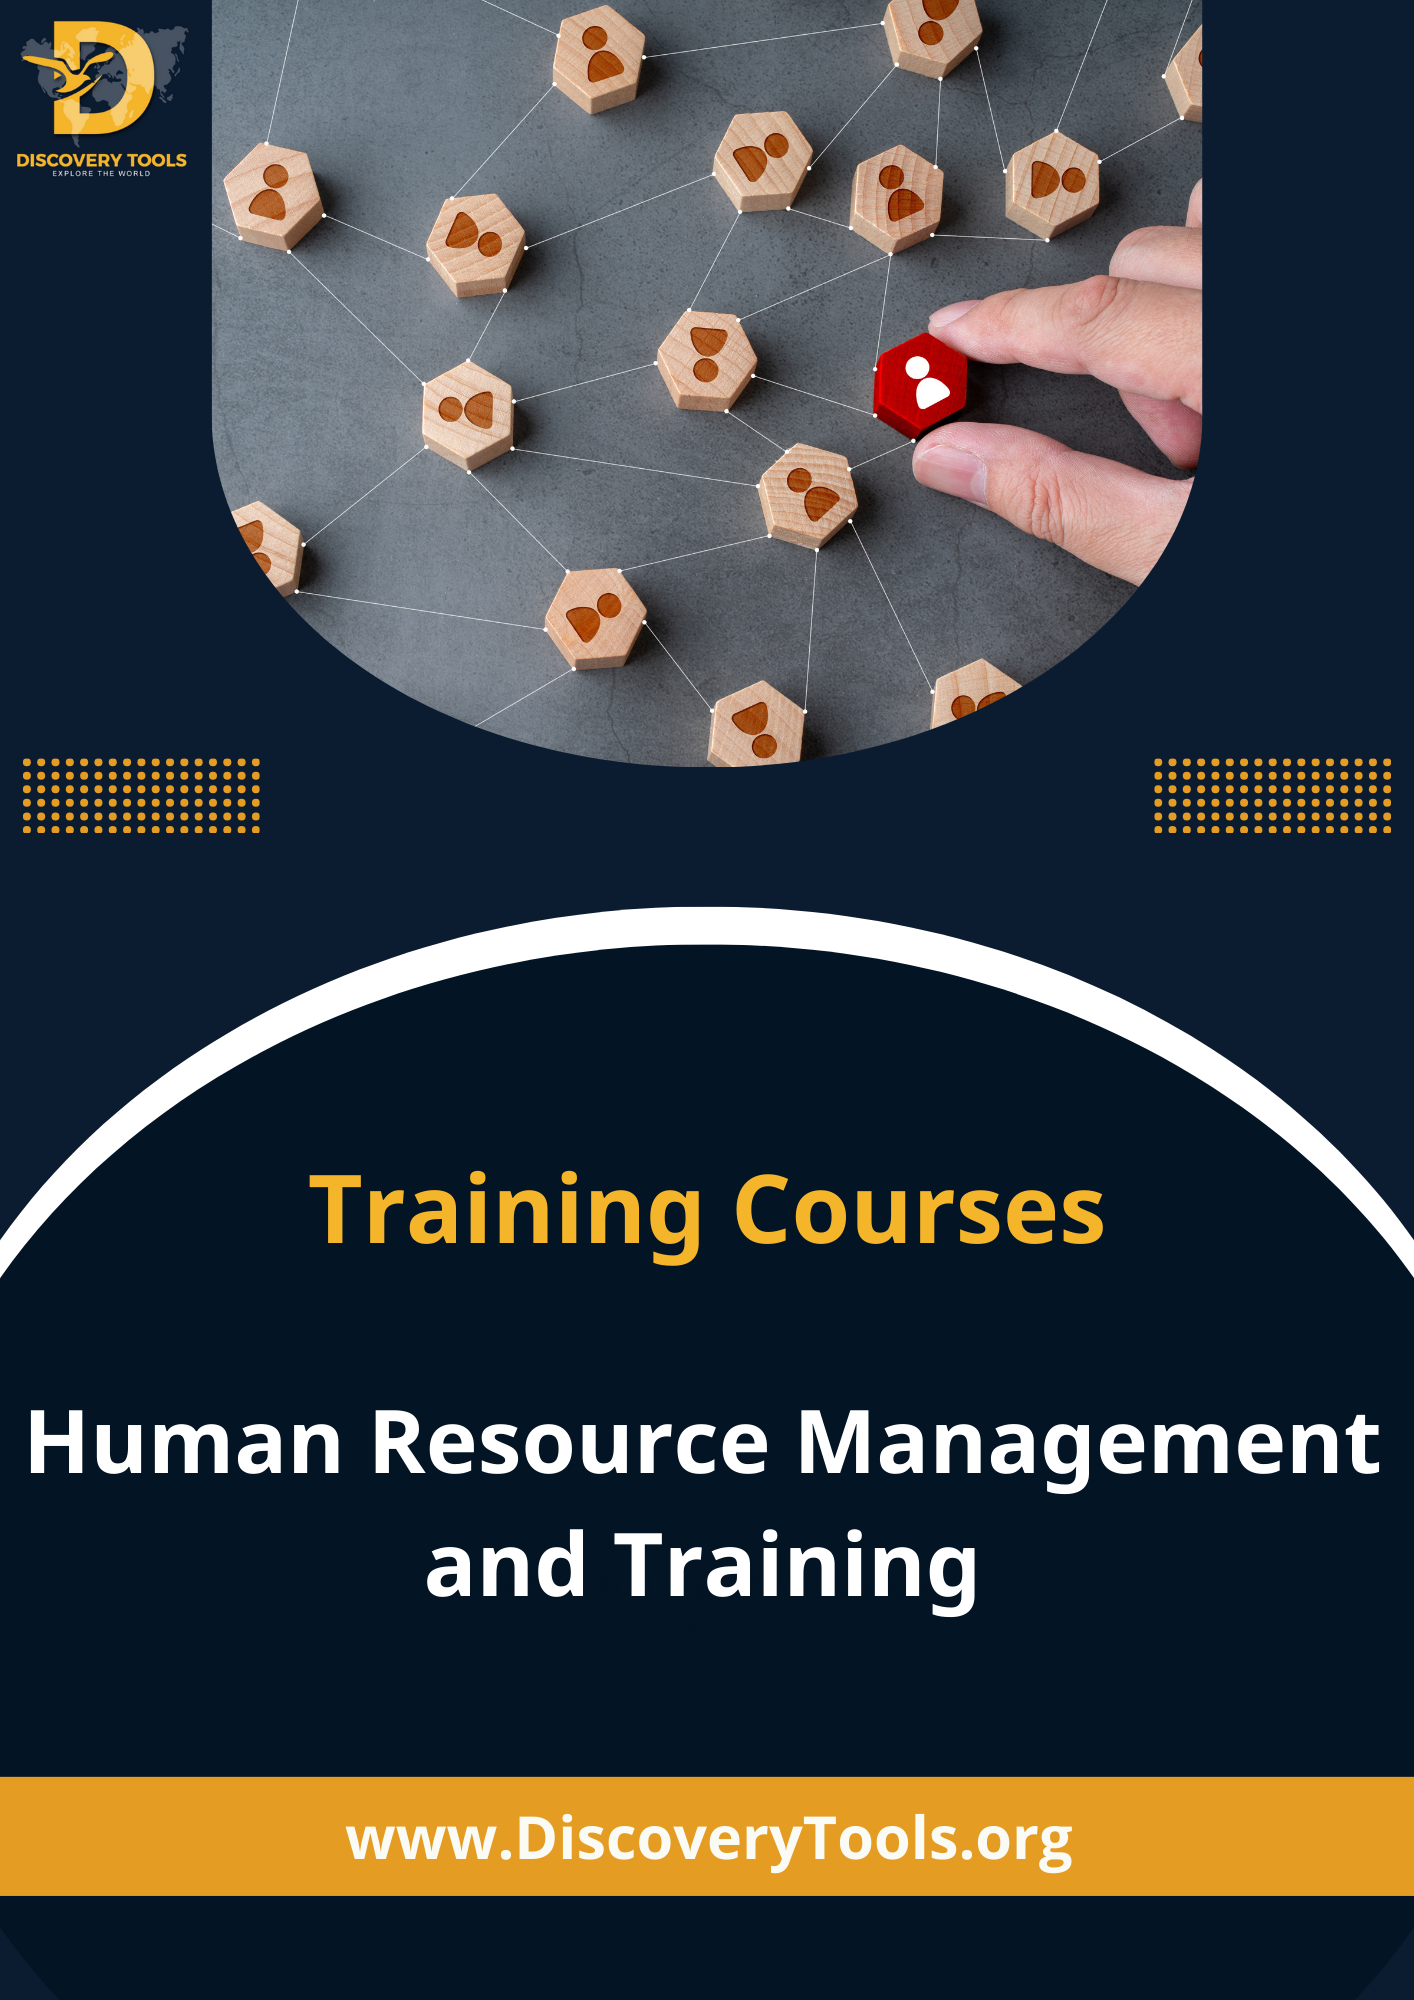 Human Resource Management and Training